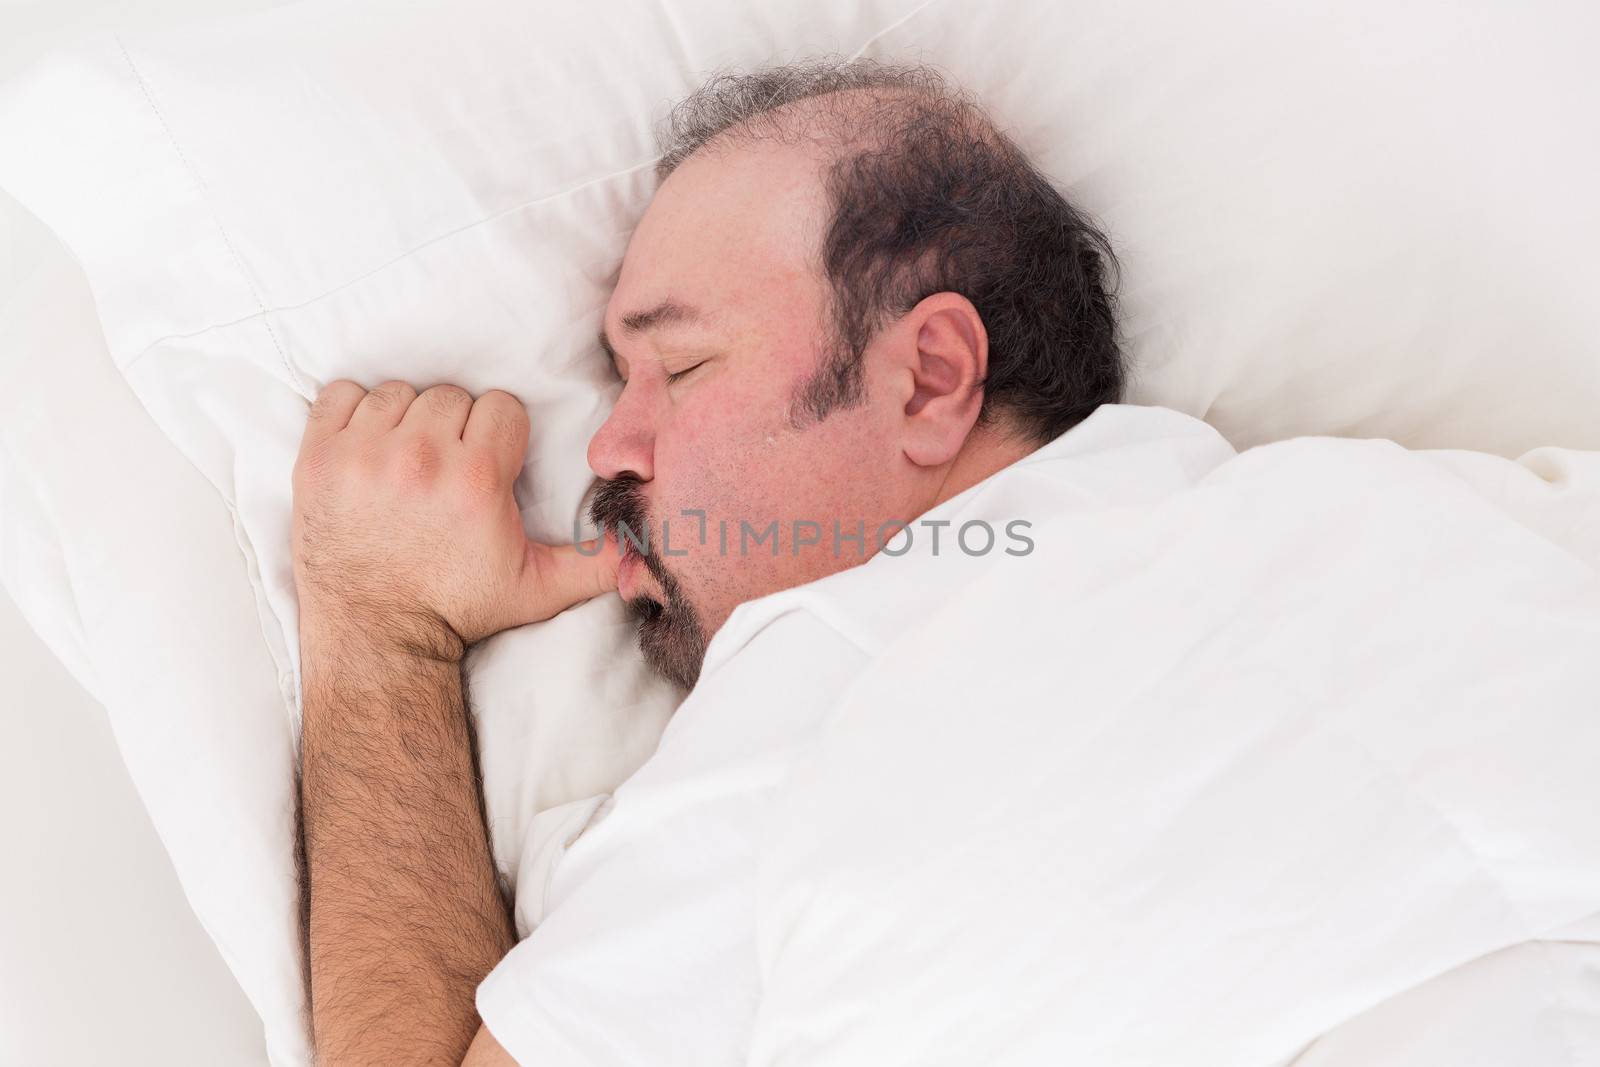 Closeup of a bearded man snuggling into his pillow sucking his thumb like a big baby while sleeping with a serene innocent expression